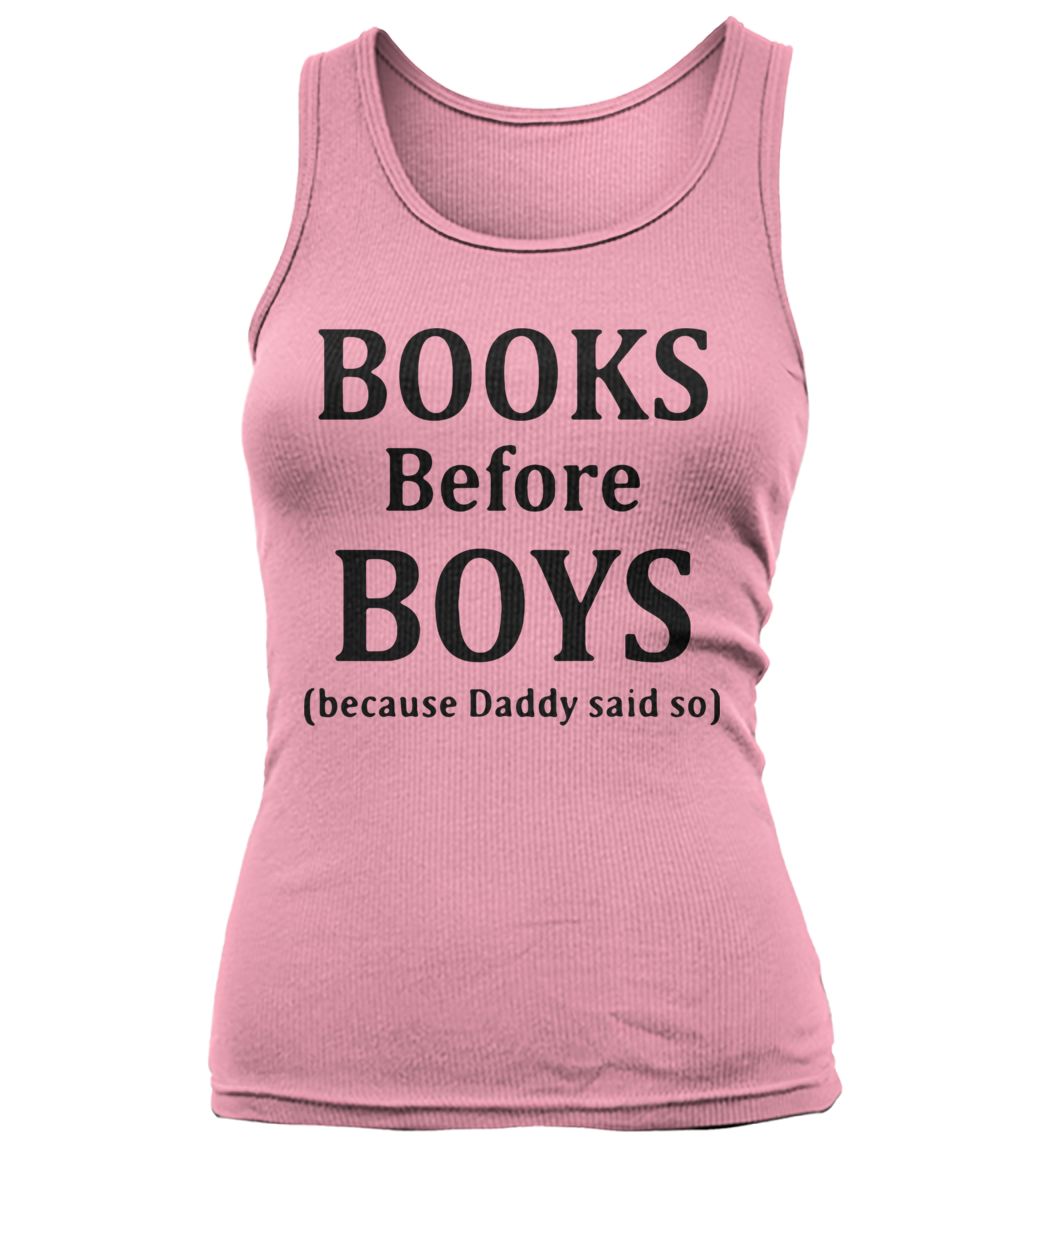 Books before boys because daddy said no women's tank top